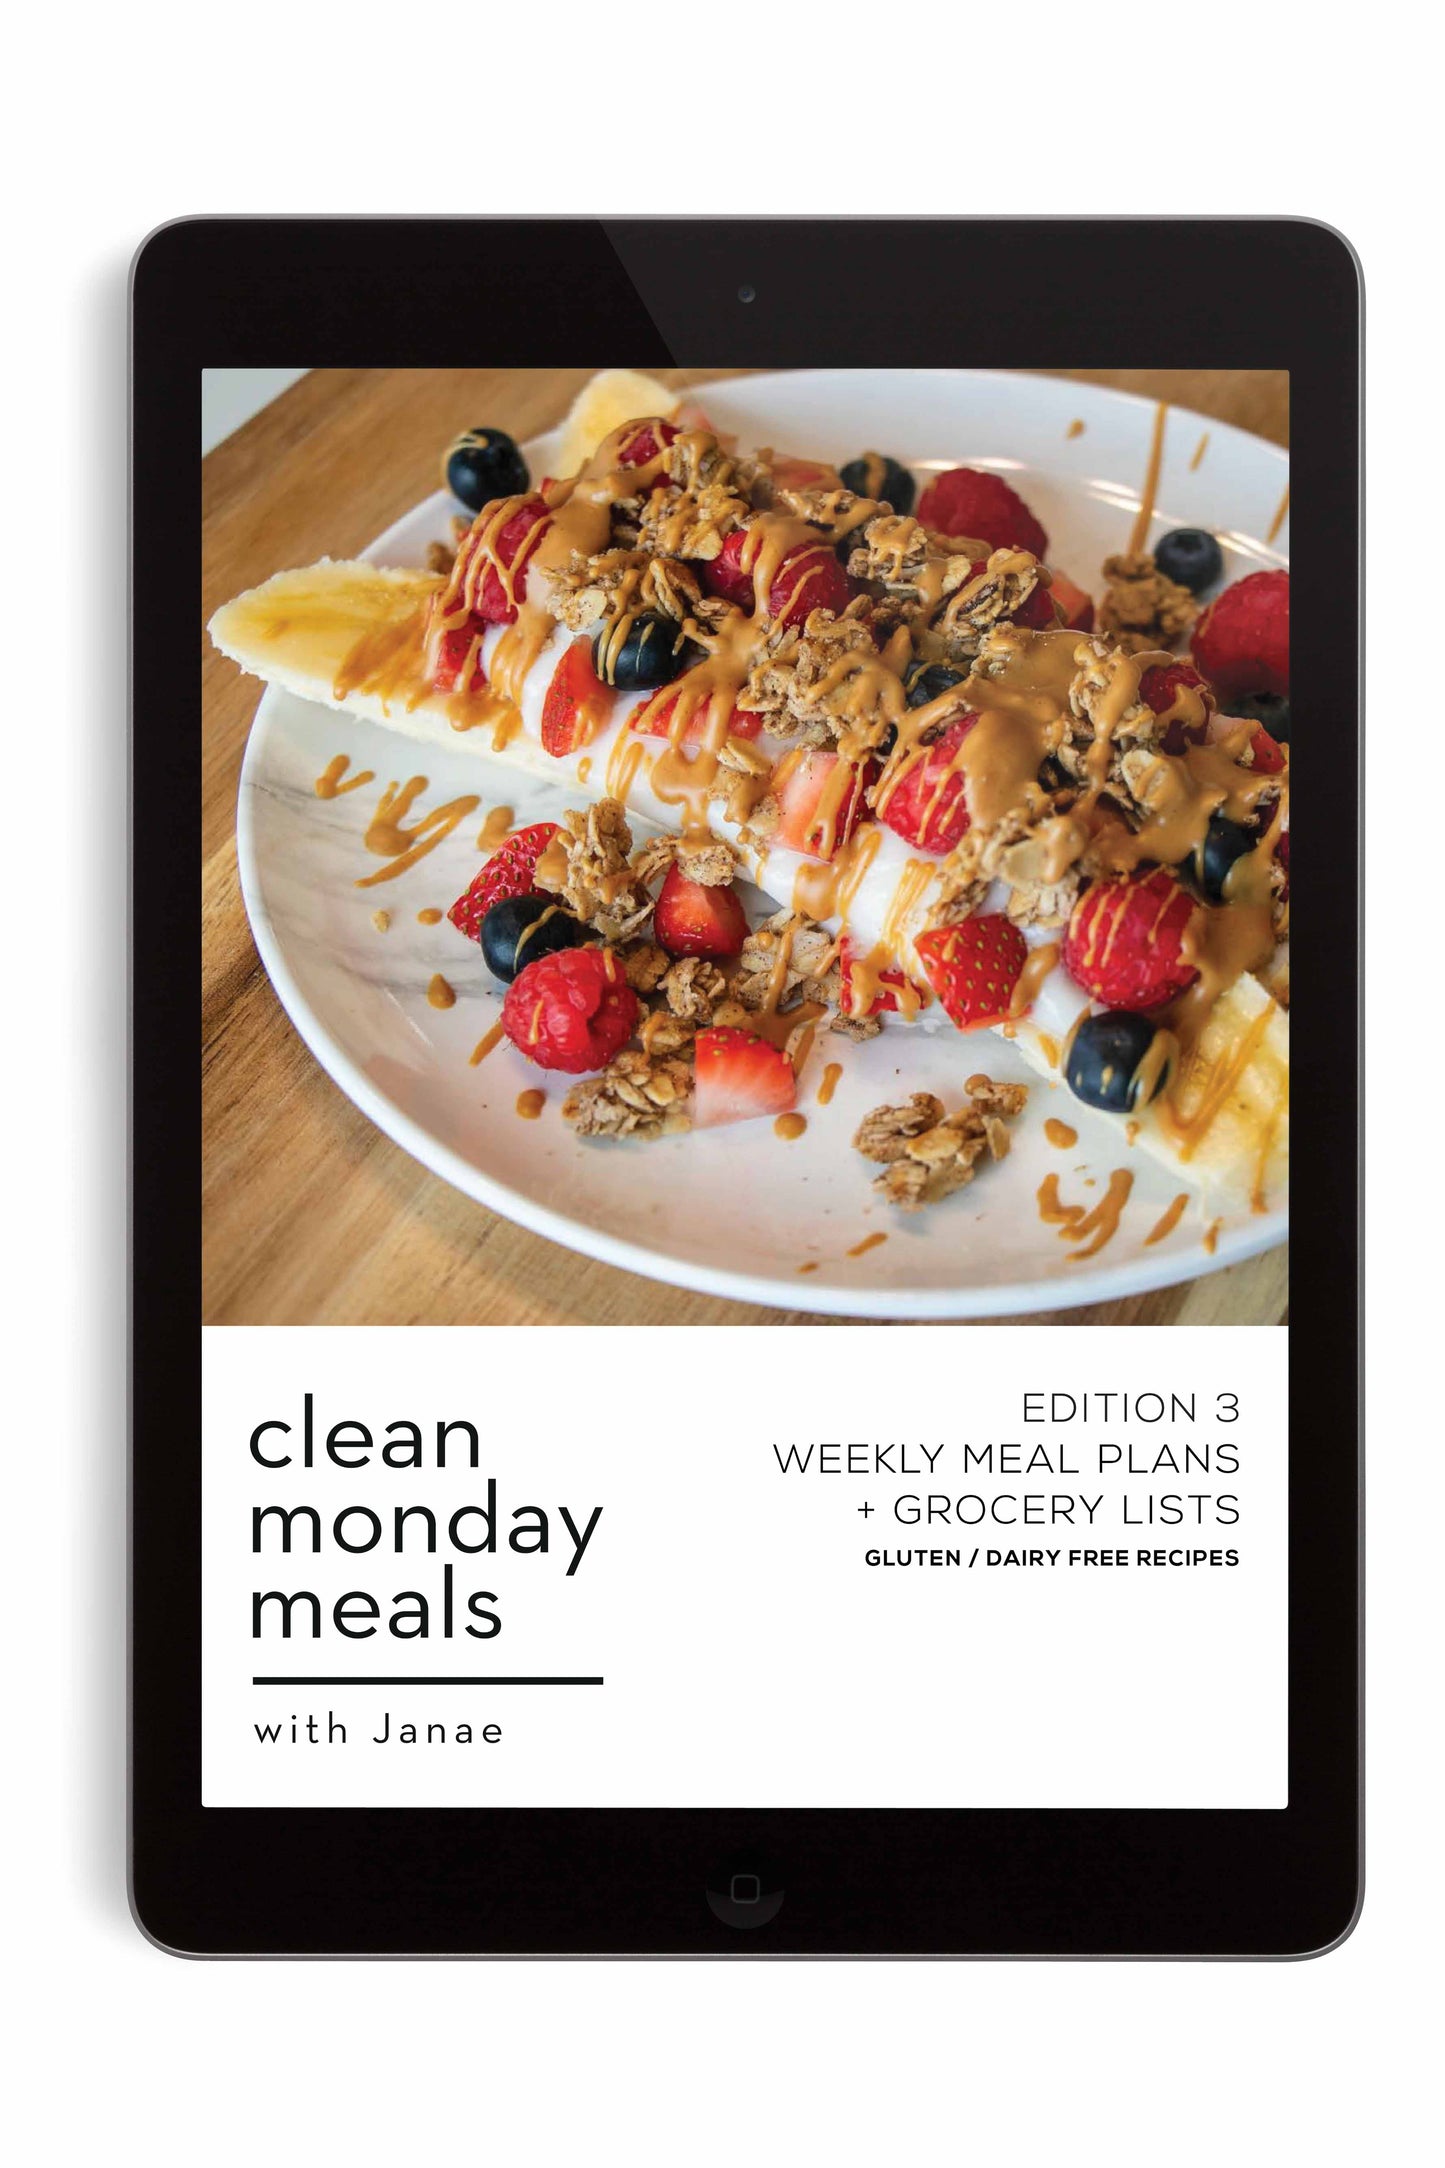 (Digital) Edition 3 with Weekly Meal Plans + Grocery Lists